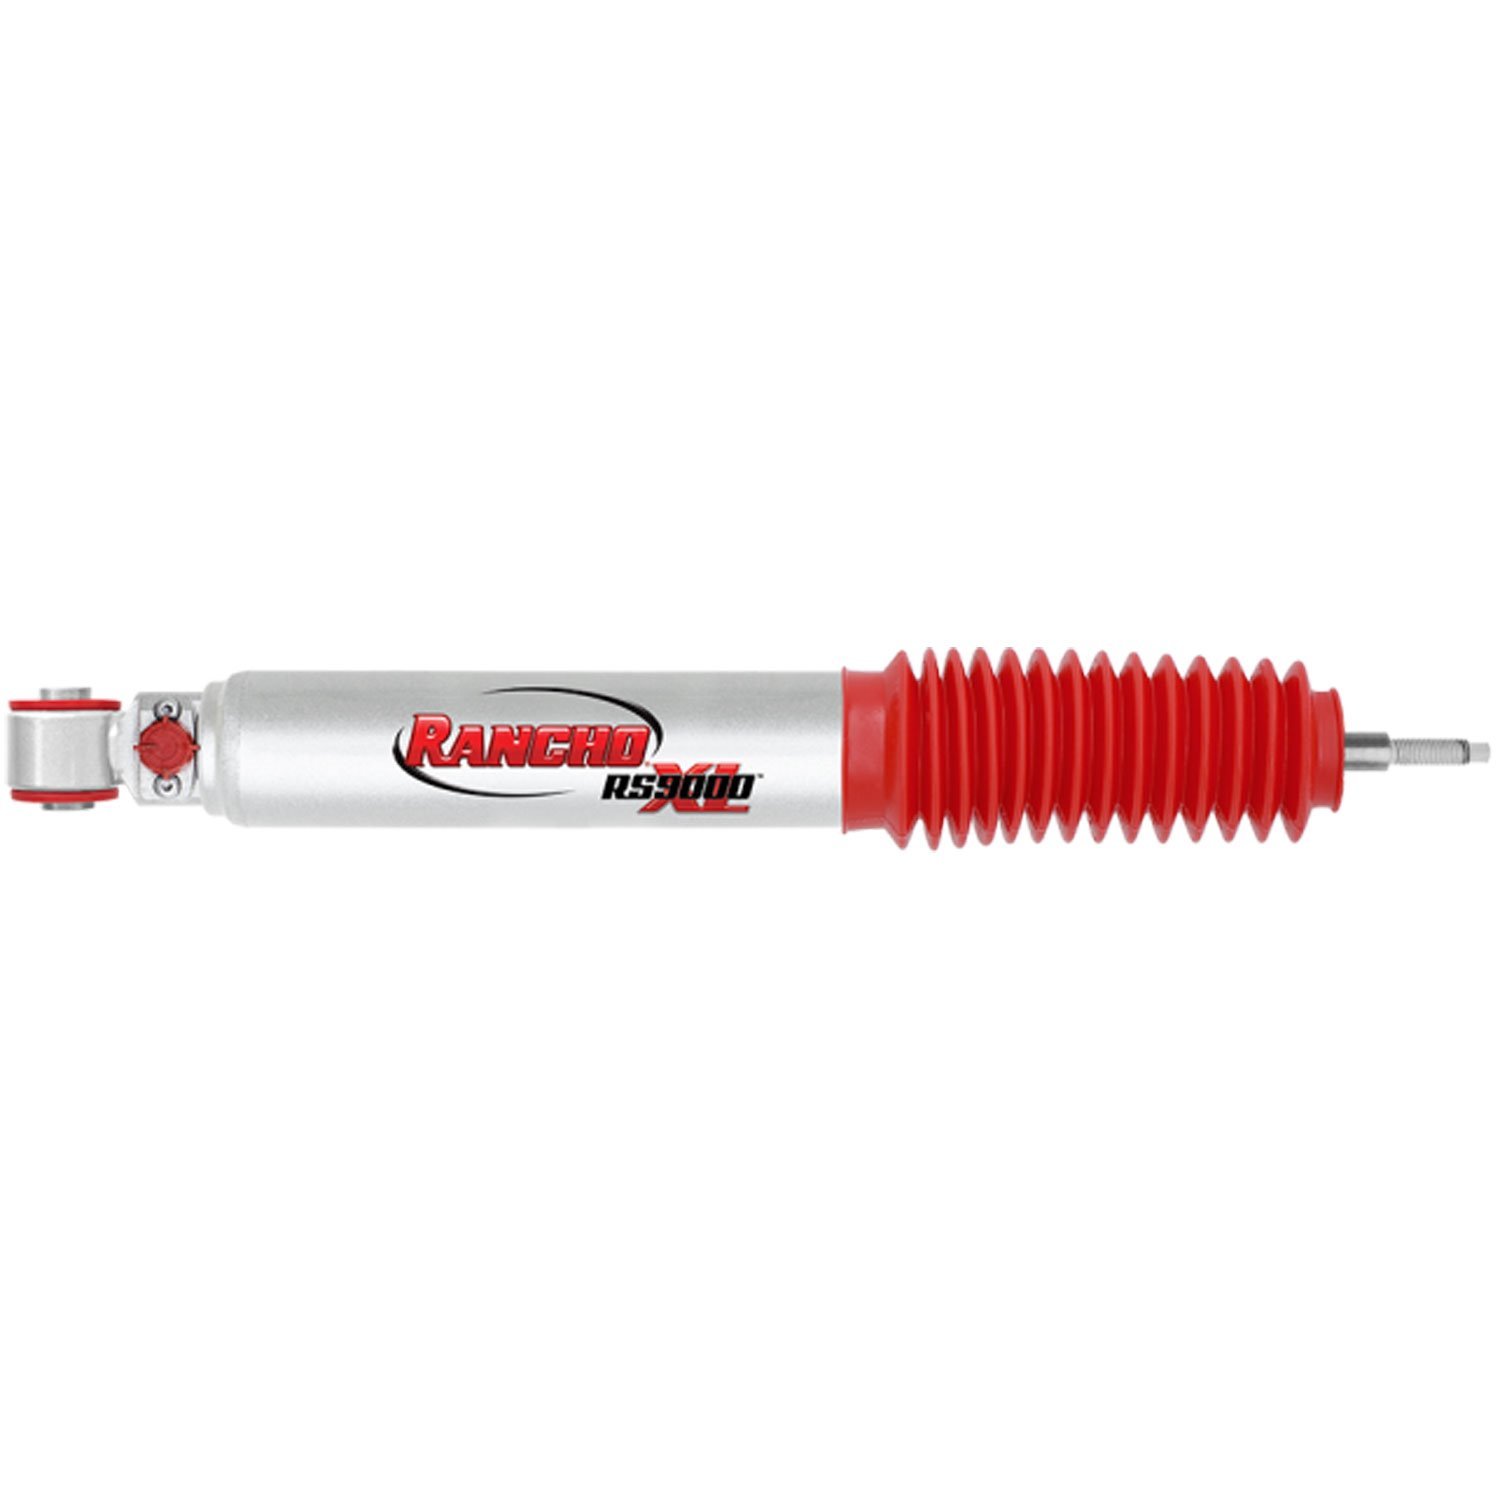 RS9000XL Rear Shock Absorber Fits Fullsize Pickup and